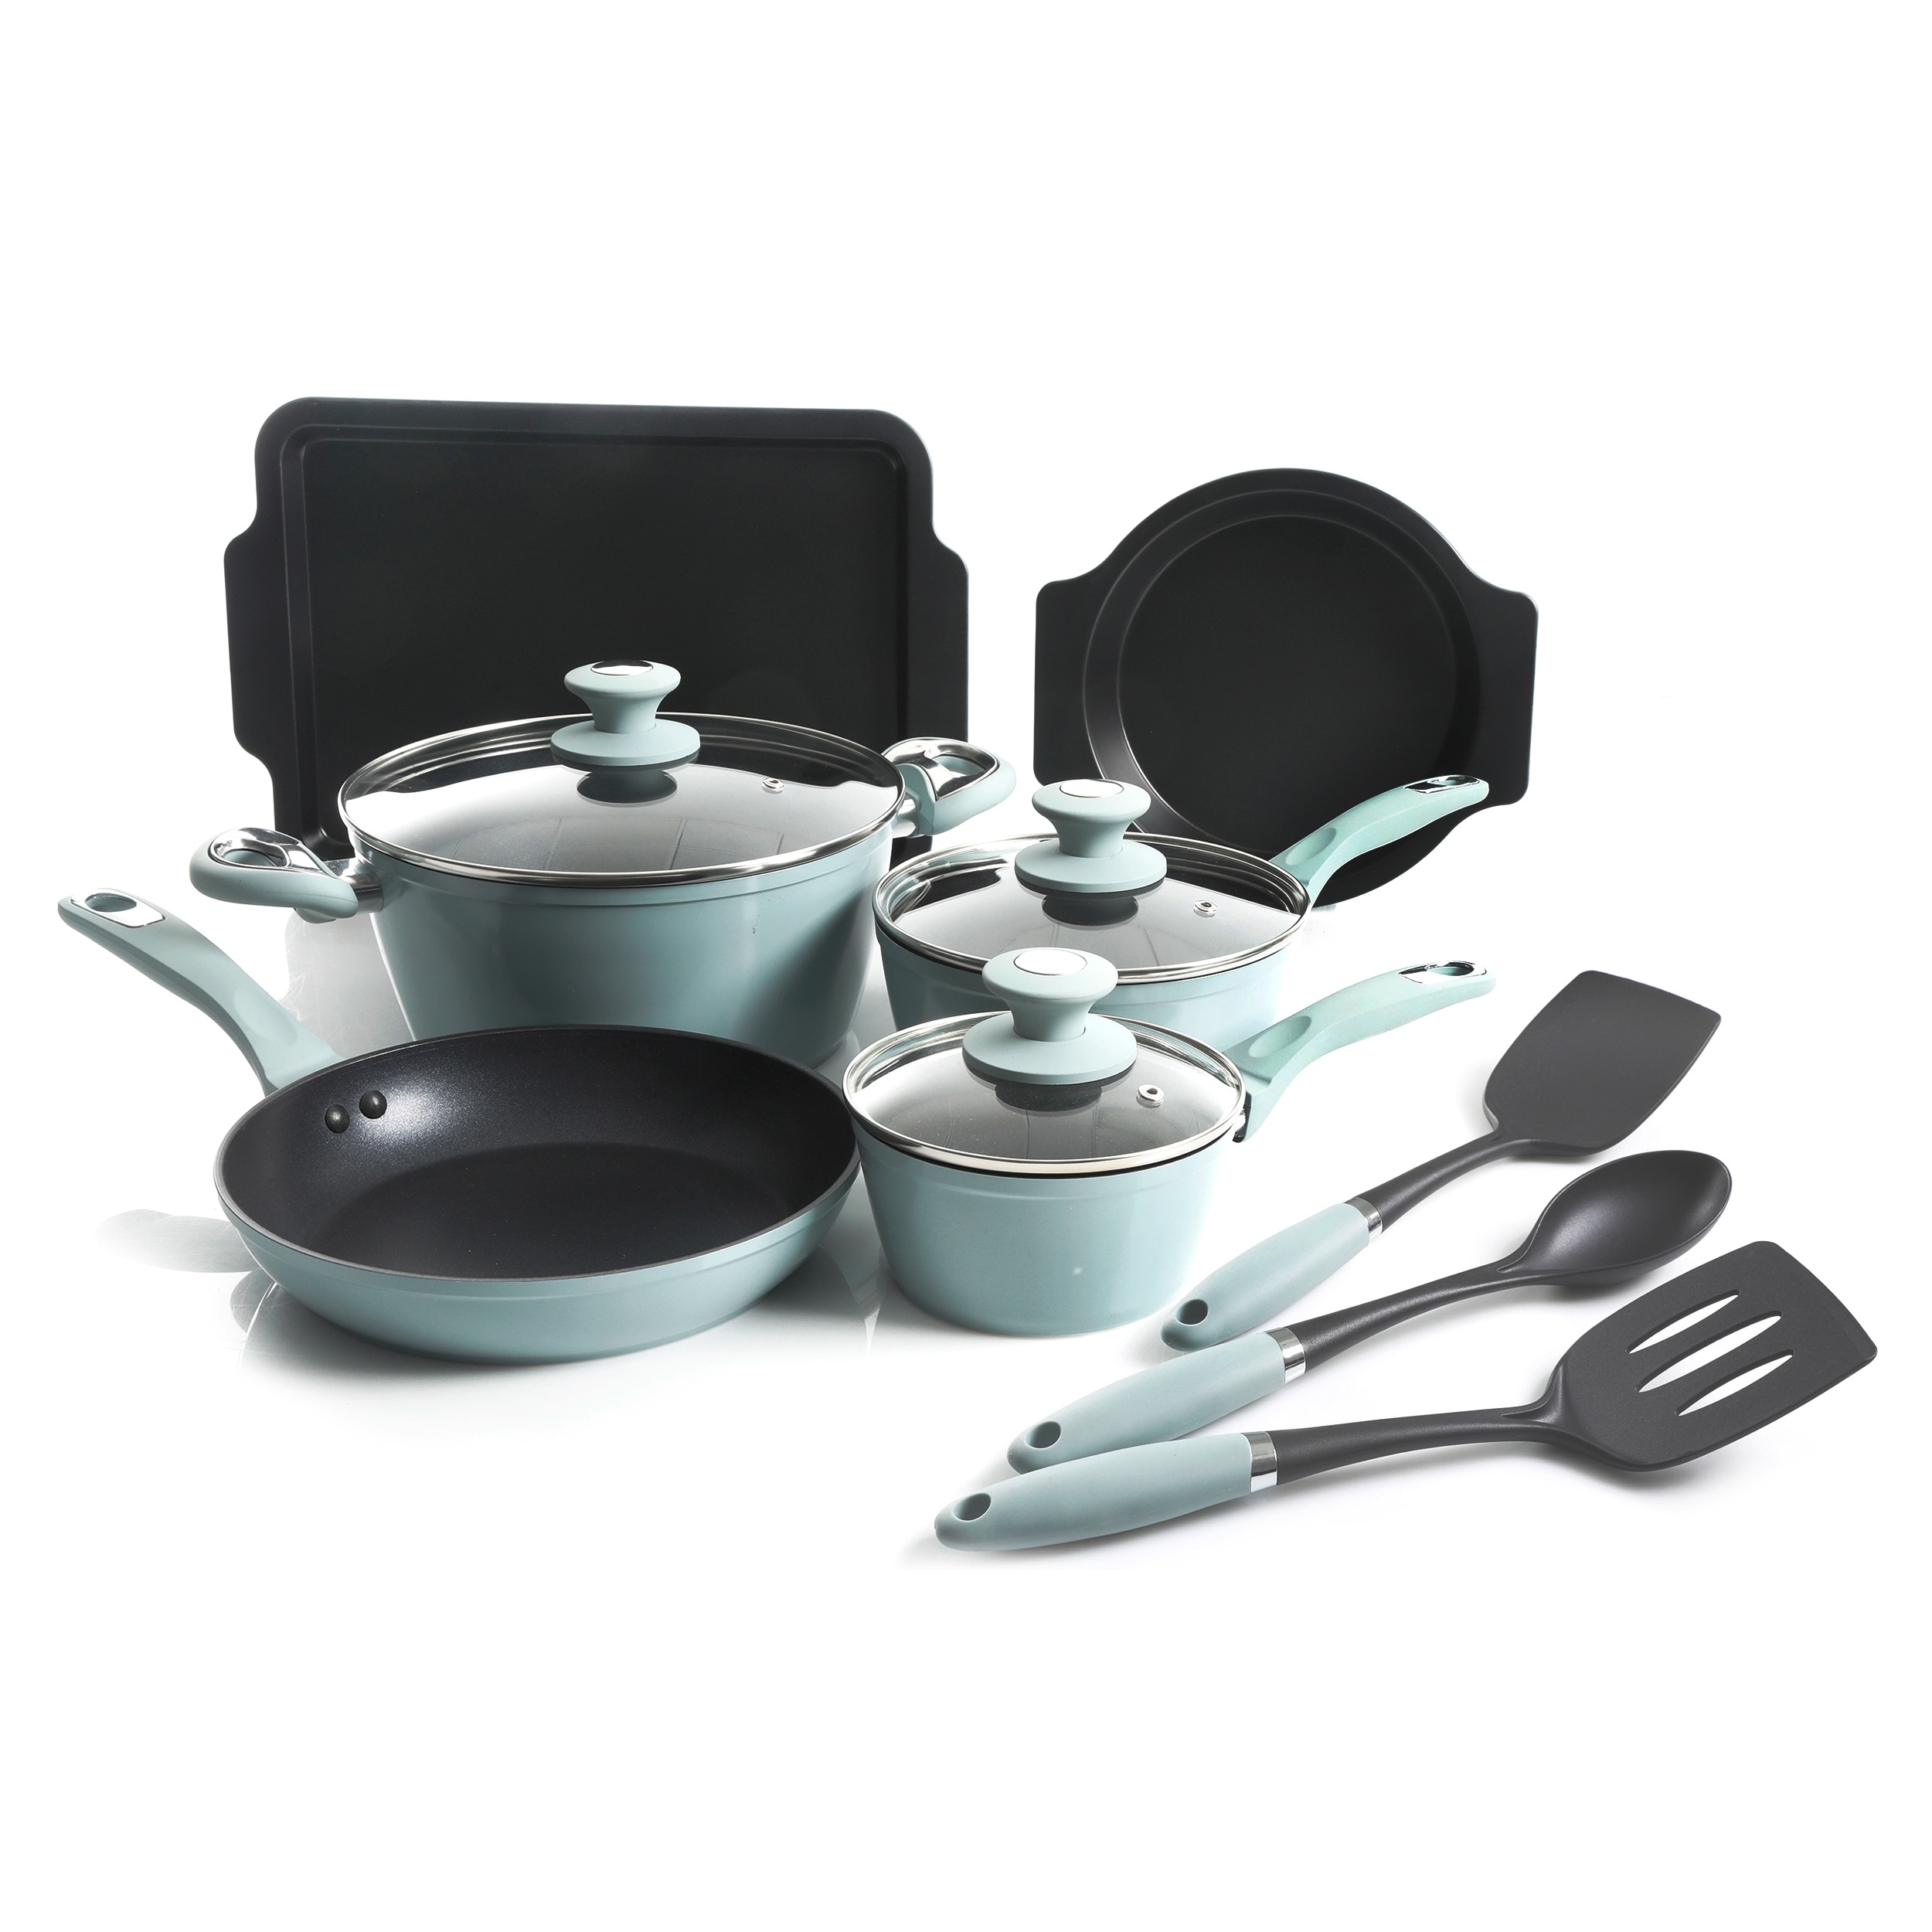 https://ak1.ostkcdn.com/images/products/is/images/direct/31d01a2bbf9ca98206e0651710141330e8b91614/Oster-Lynhurst-12Pc-Nonstick-Aluminum-Cookware-Set-in-Blue-with-Tools.jpg